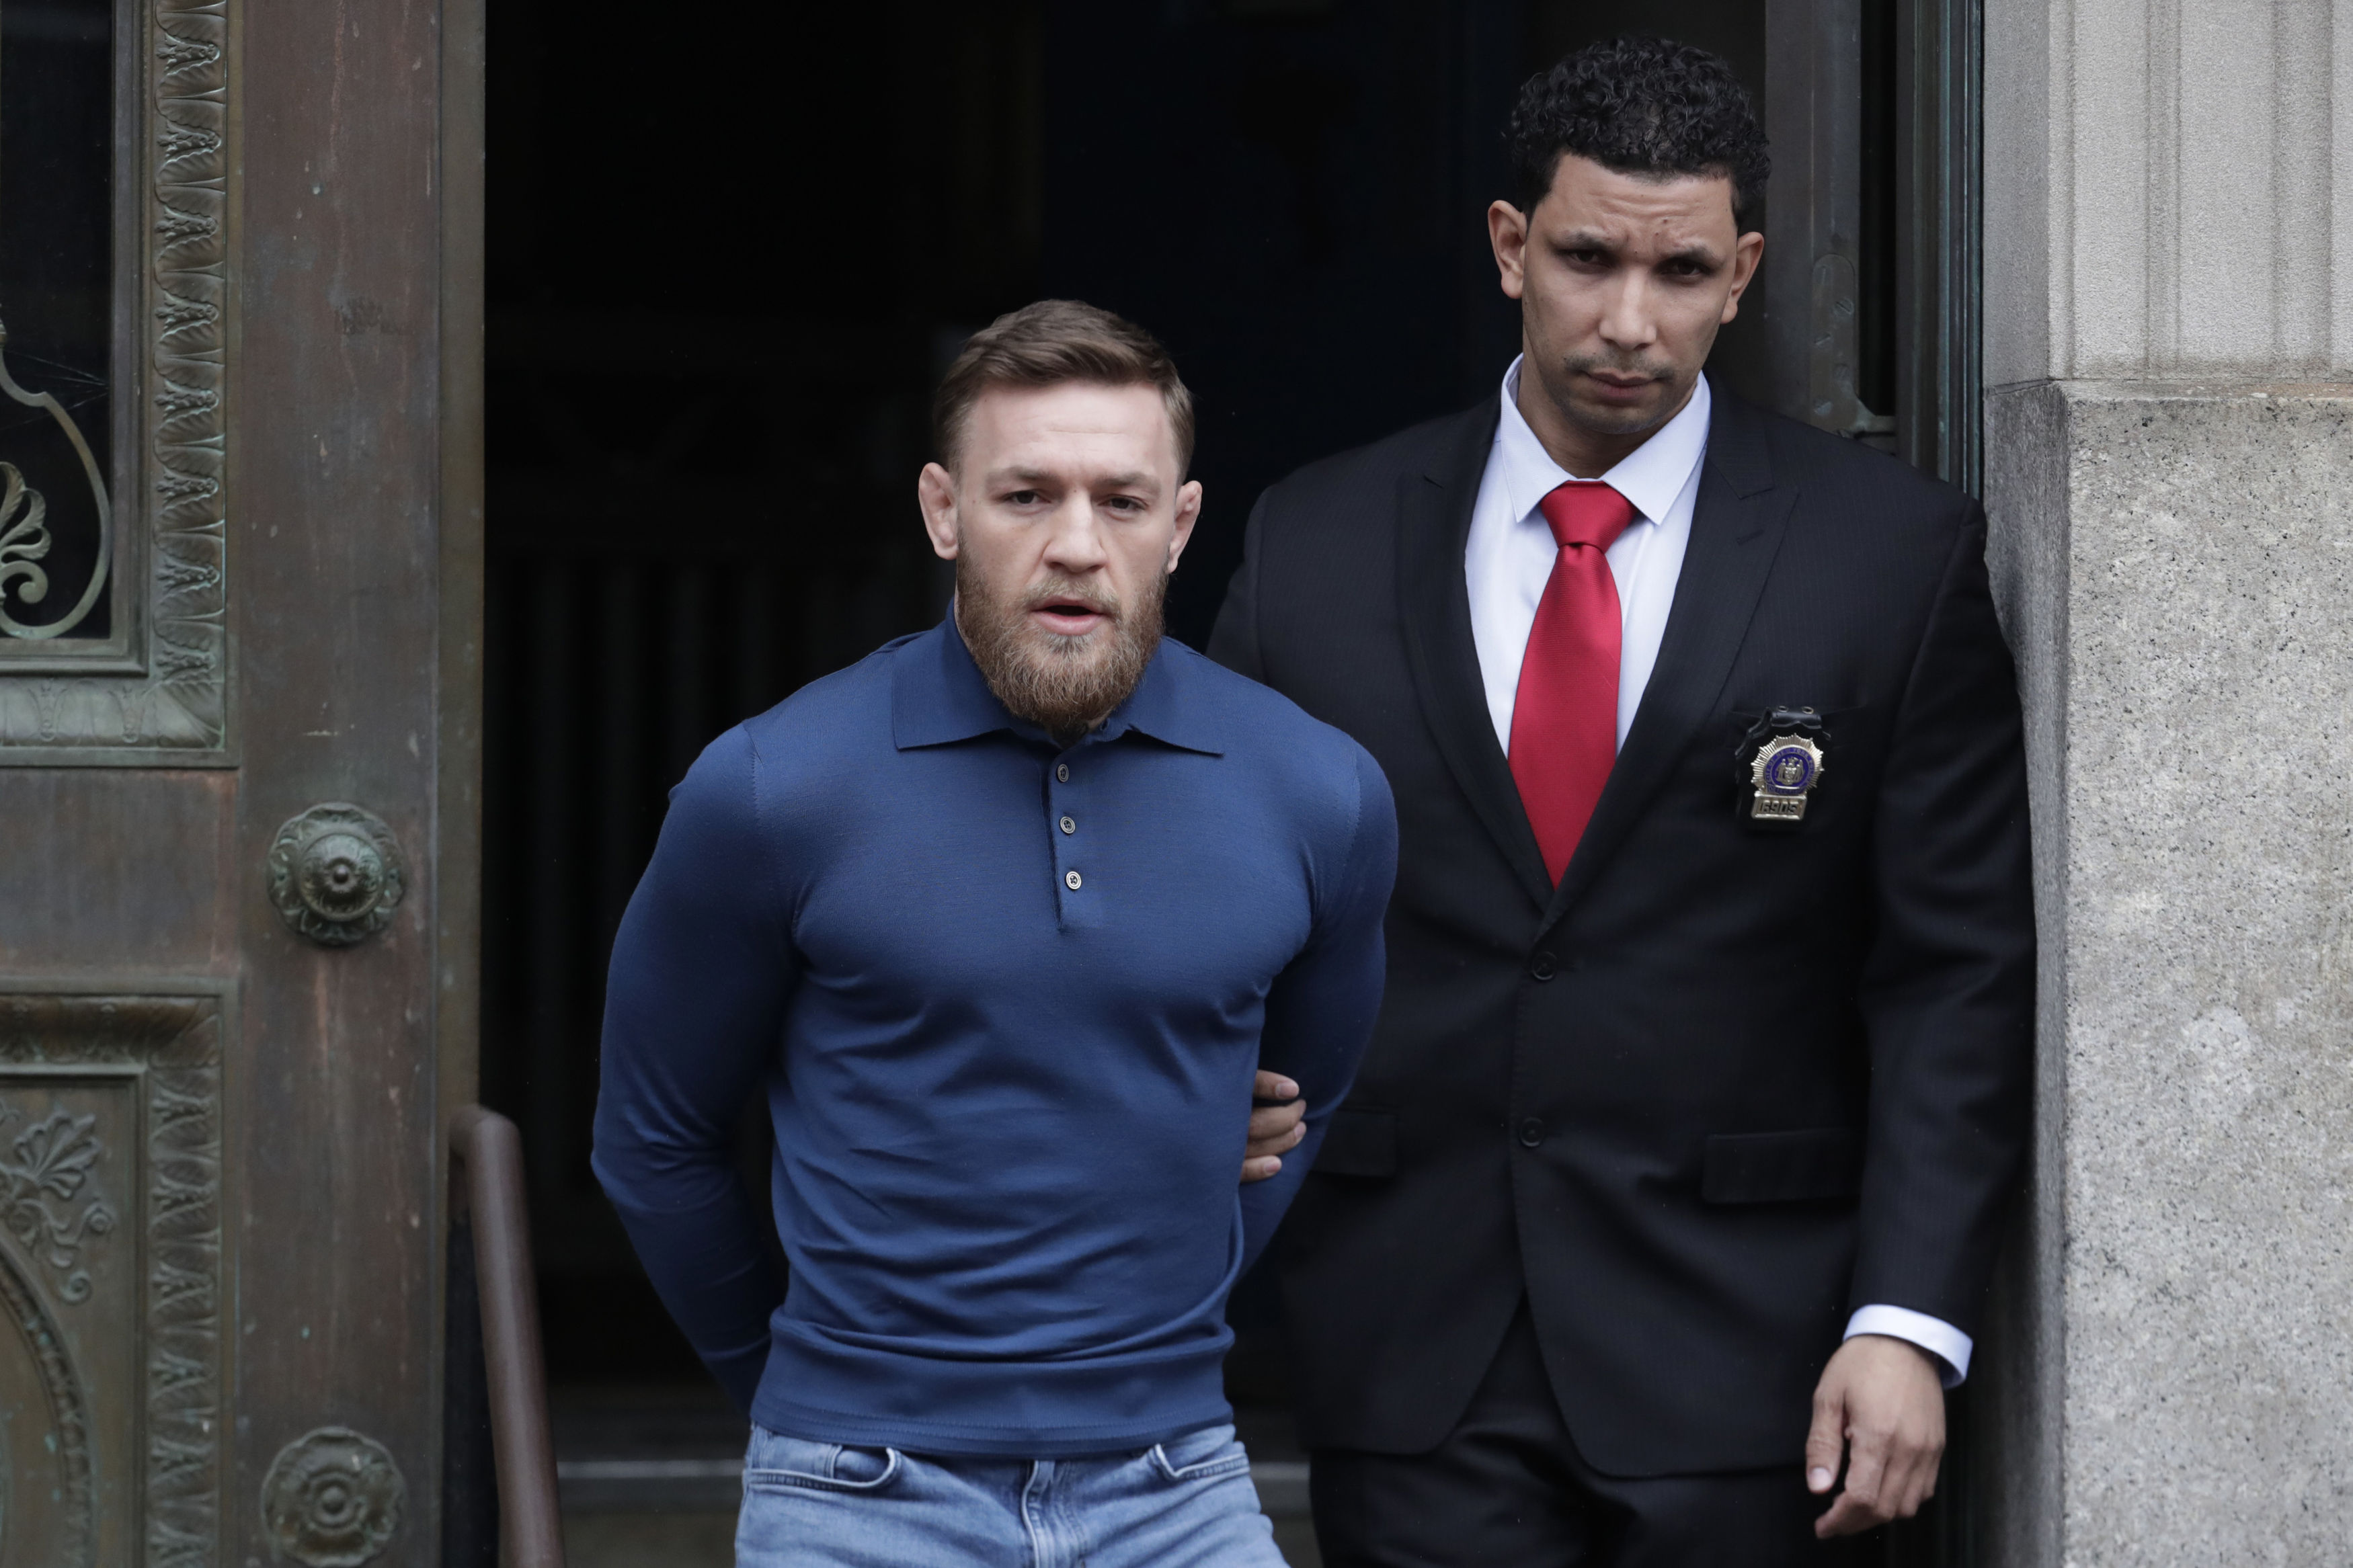 Conor McGregor, left, is led to an unmarked vehicle while leaving the 78th Precinct of the New York Police Department (AP Photo/Julio Cortez)